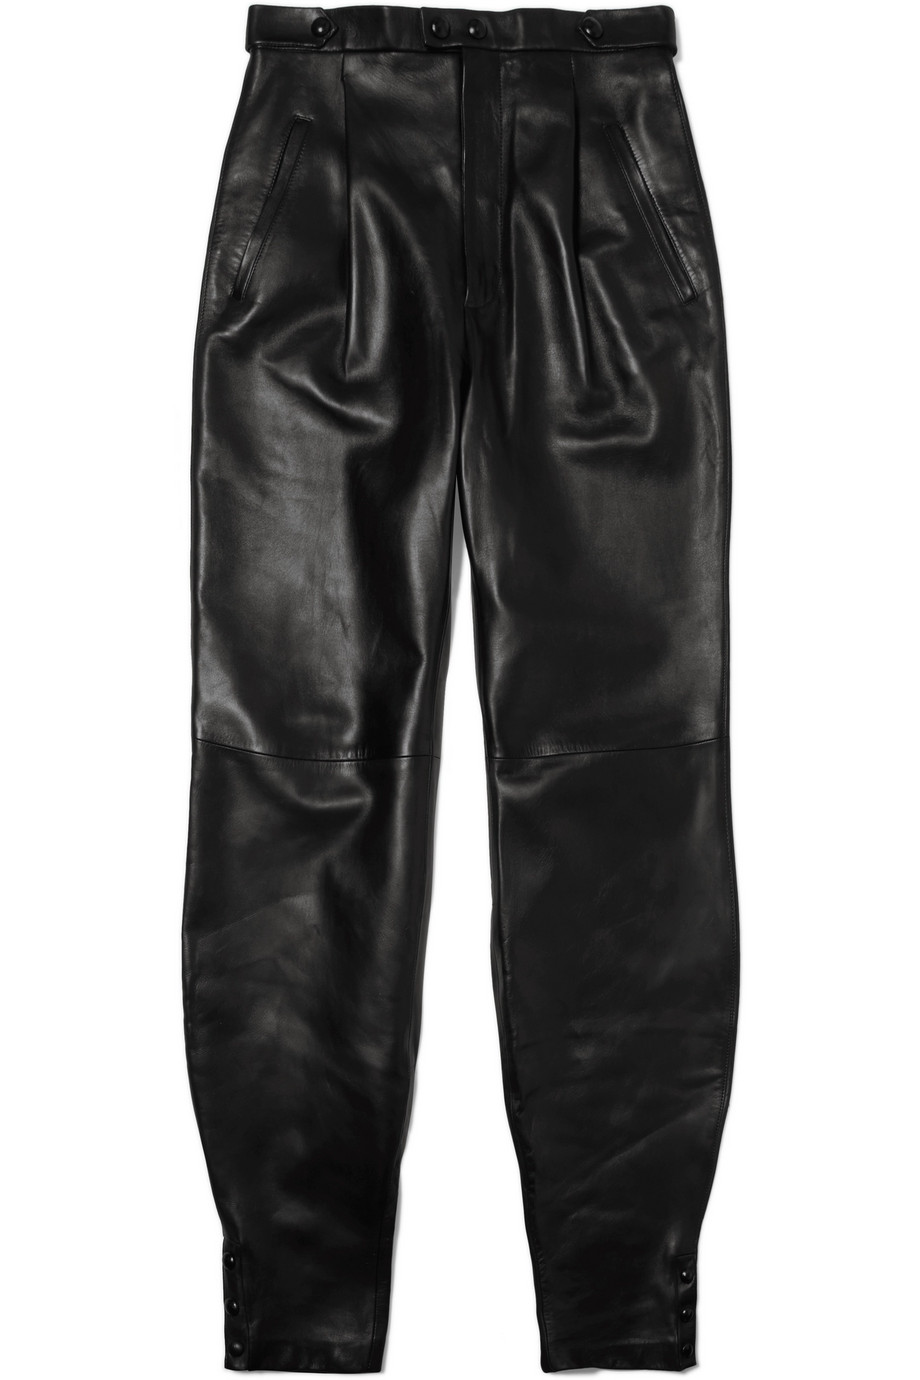 GIVENCHY – TAPERED PANTS THE UNTITLED